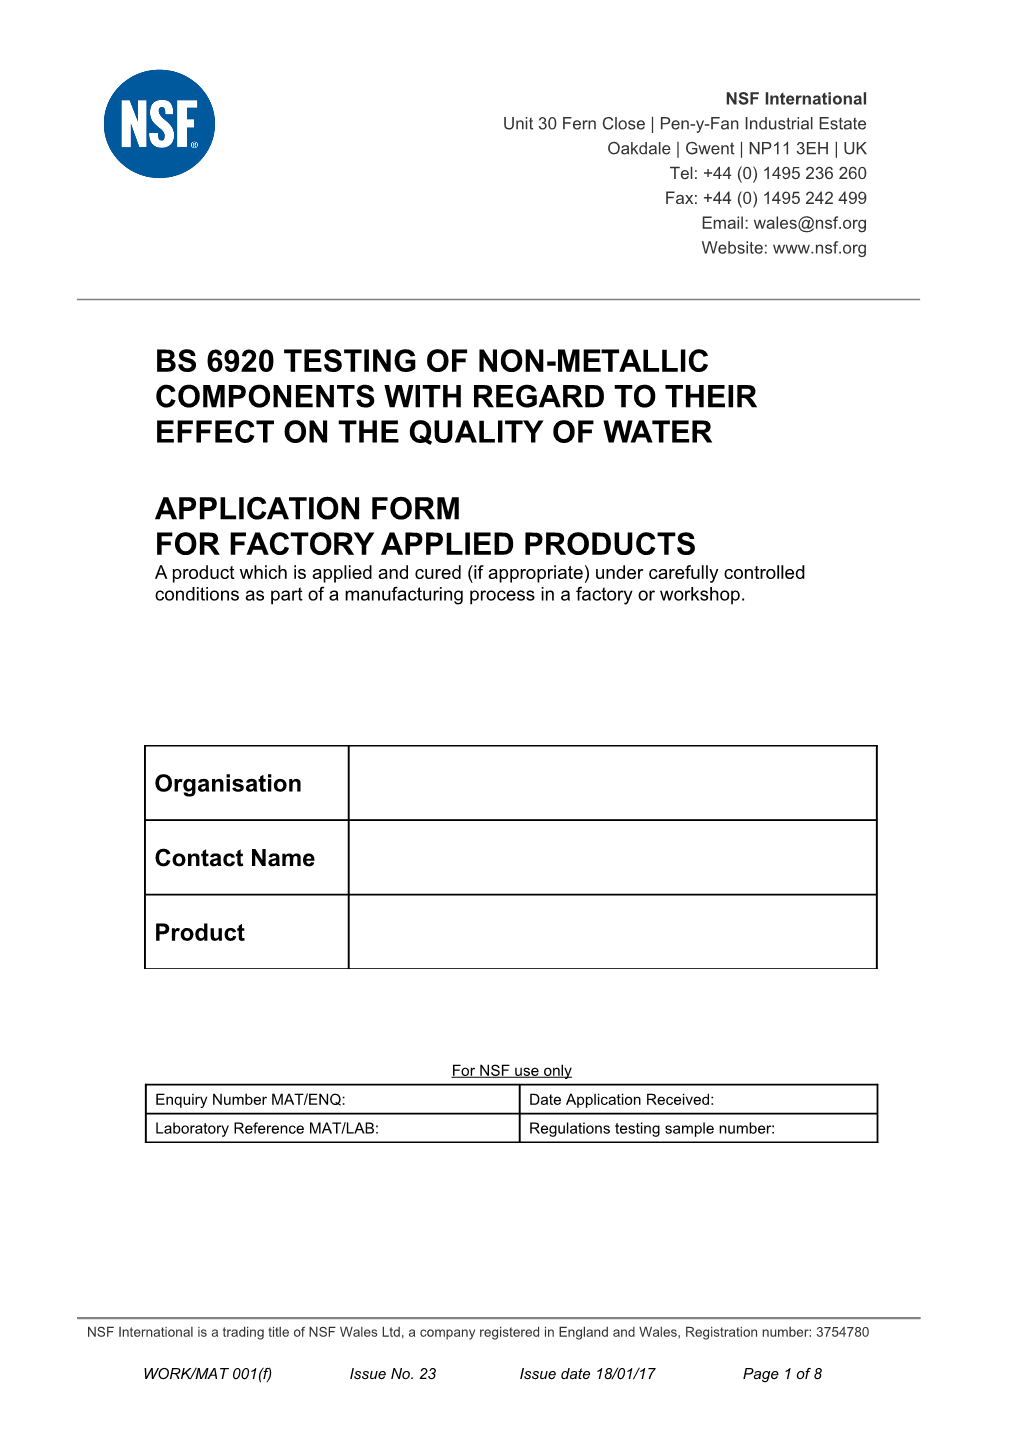 WORK/MAT001 Application Form Issue 8